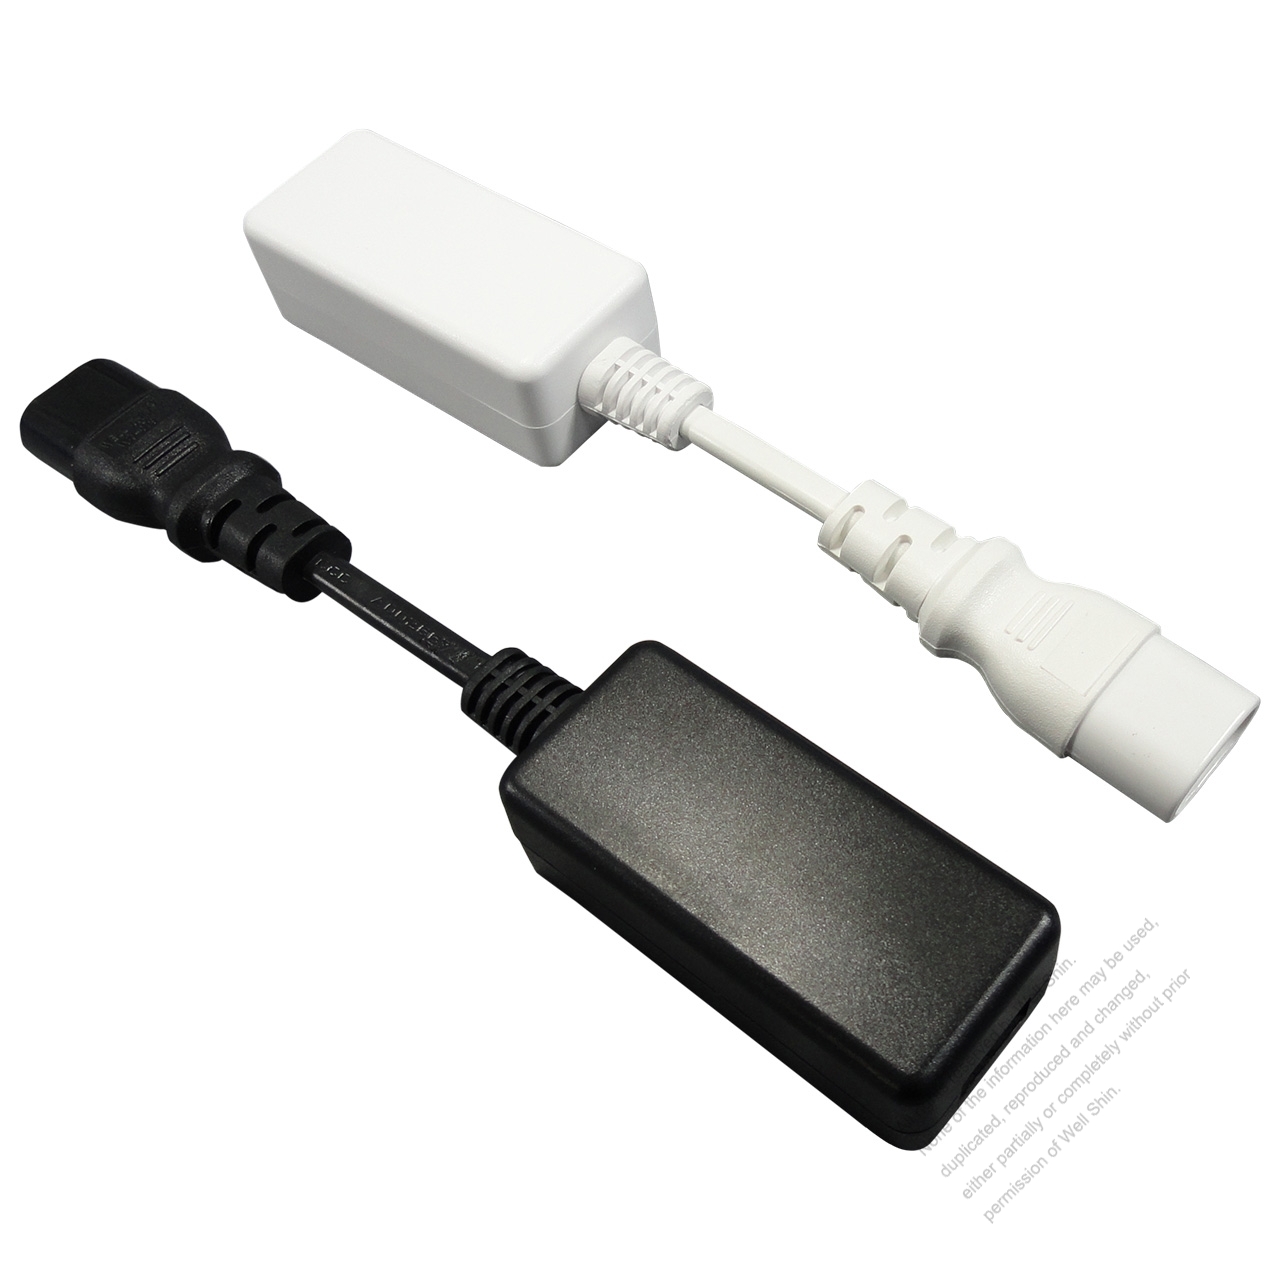 AC/DC 1A IEC 320 Sheet C, 2 prong Plug to USB Outlet Charger, with 15cm AC Cord - Well Shin Technology Ltd.